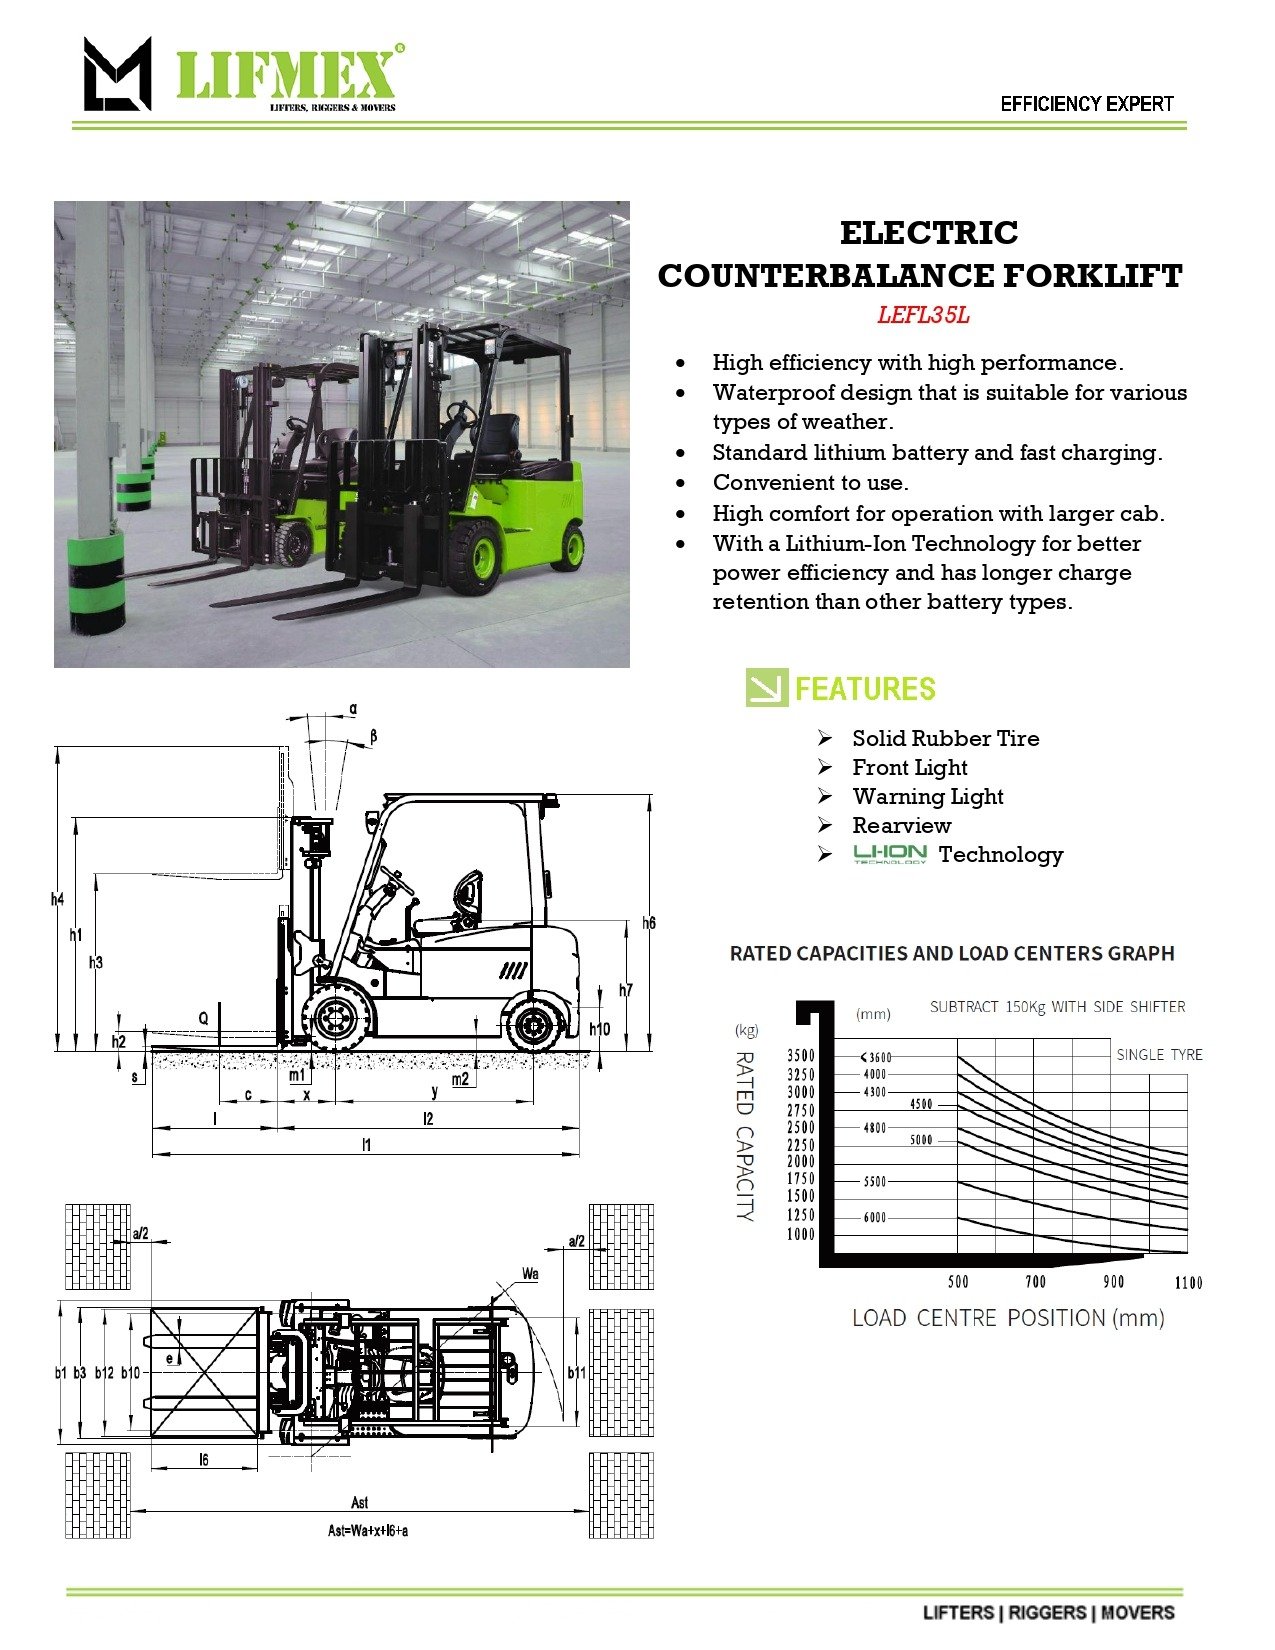 Electric Counterbalance Forklift
Electric Counterbalance Forklift suppliers in UAE and Dubai
Electric Counterbalance Forklift near me